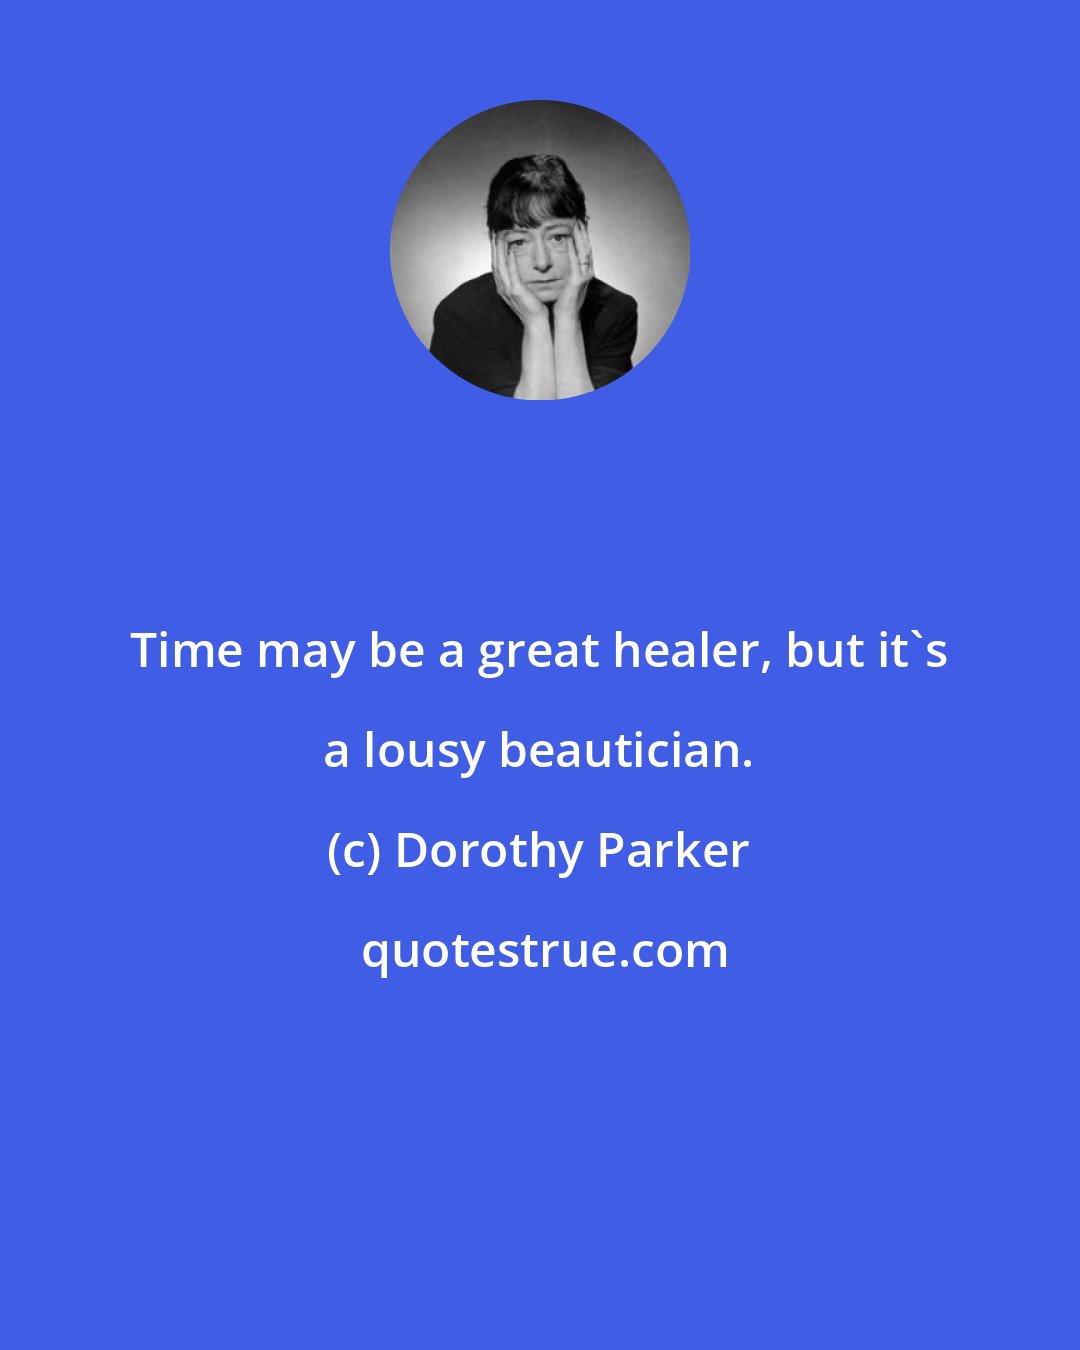 Dorothy Parker: Time may be a great healer, but it's a lousy beautician.